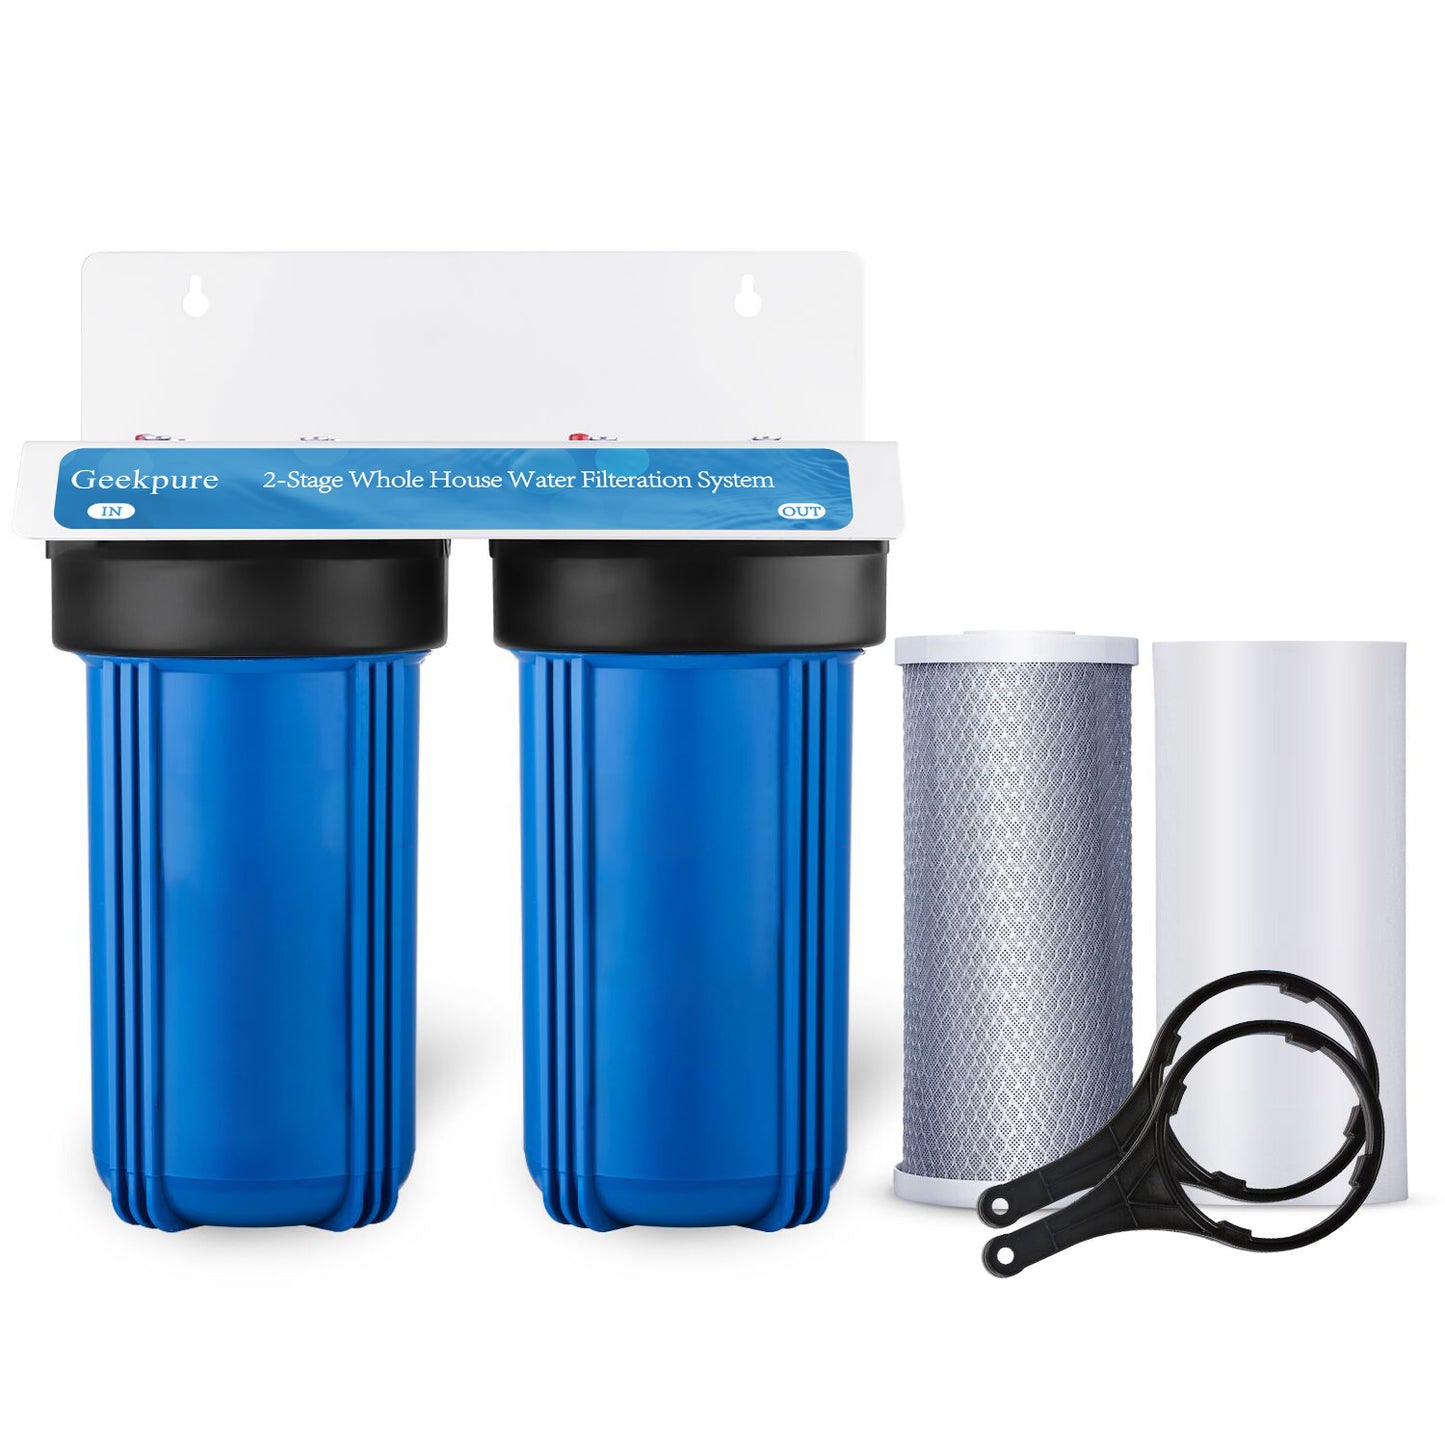 Geekpure 2 Stage Whole House Water Filtration System w/ 10" Blue Housing-1"NPT